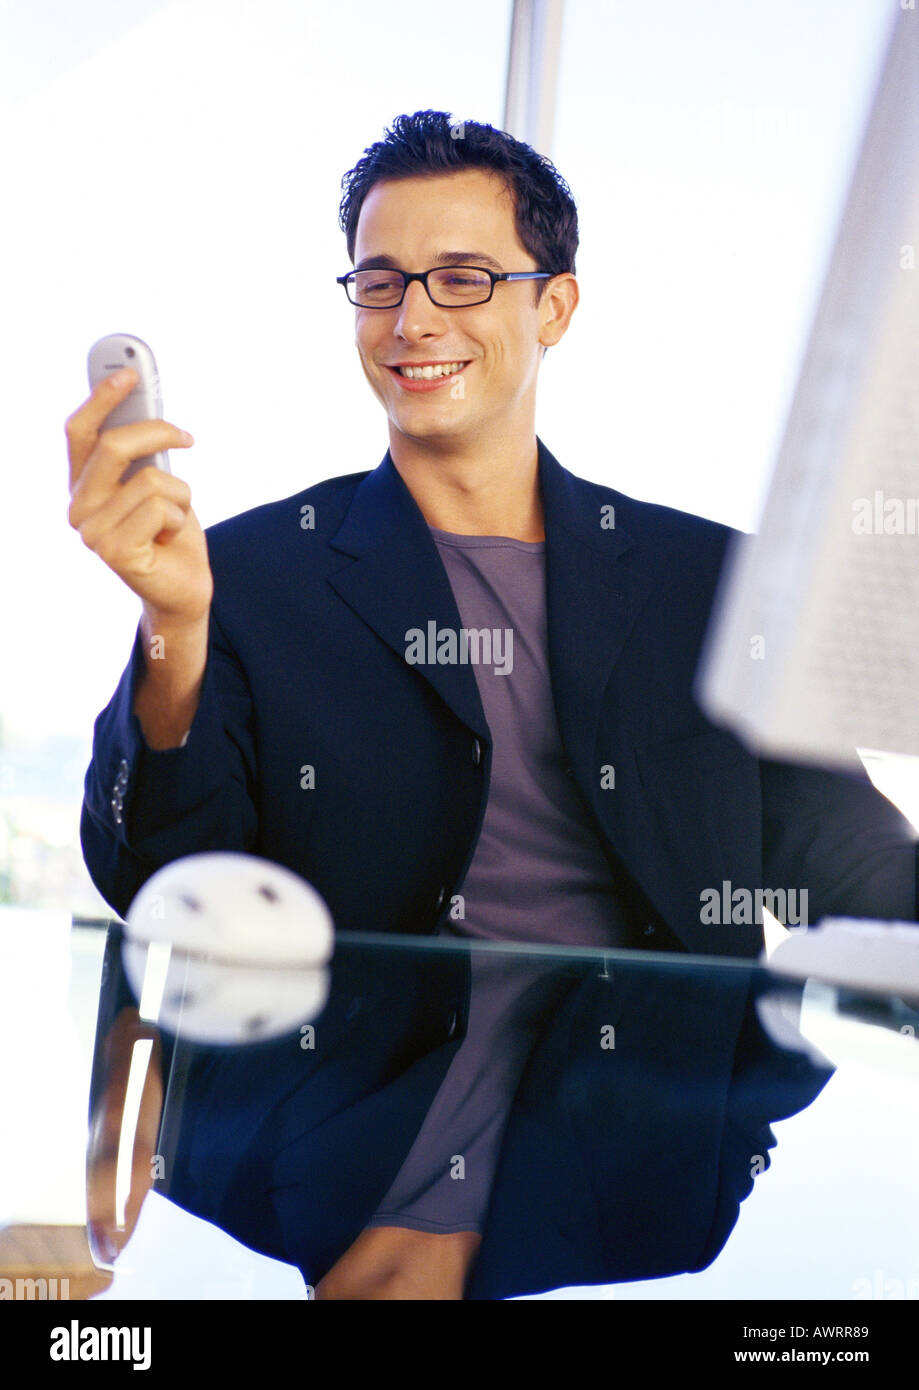 Businessman holding cell phone, smiling Banque D'Images